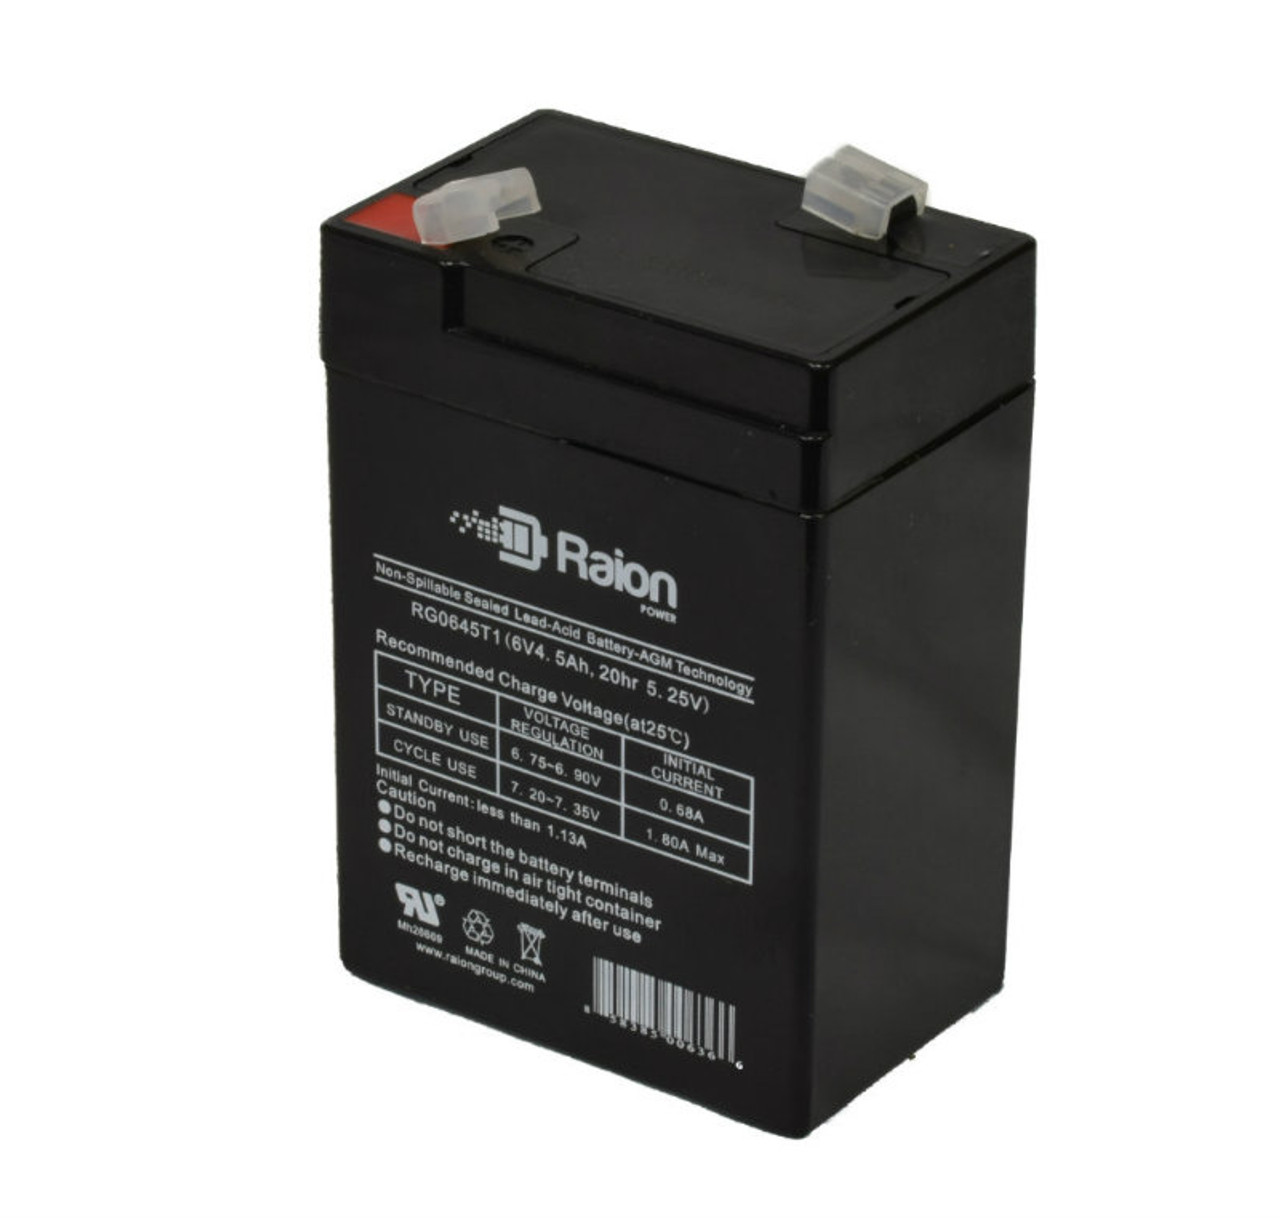 Raion Power RG0645T1 6V 4.5Ah Replacement Battery Cartridge for Gaston GT6-5HR